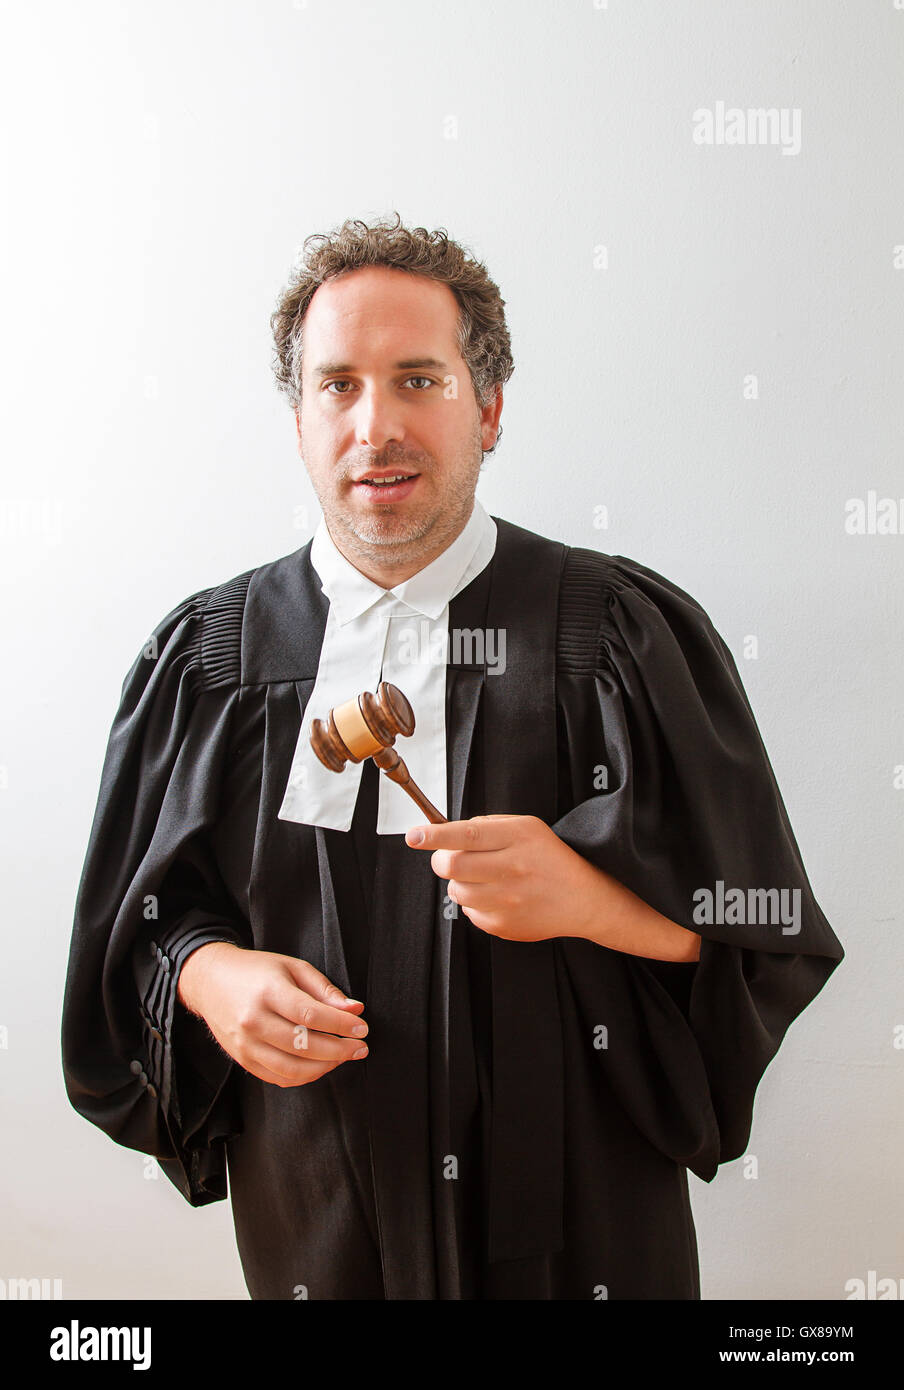 Lawyer with gavel Stock Photo